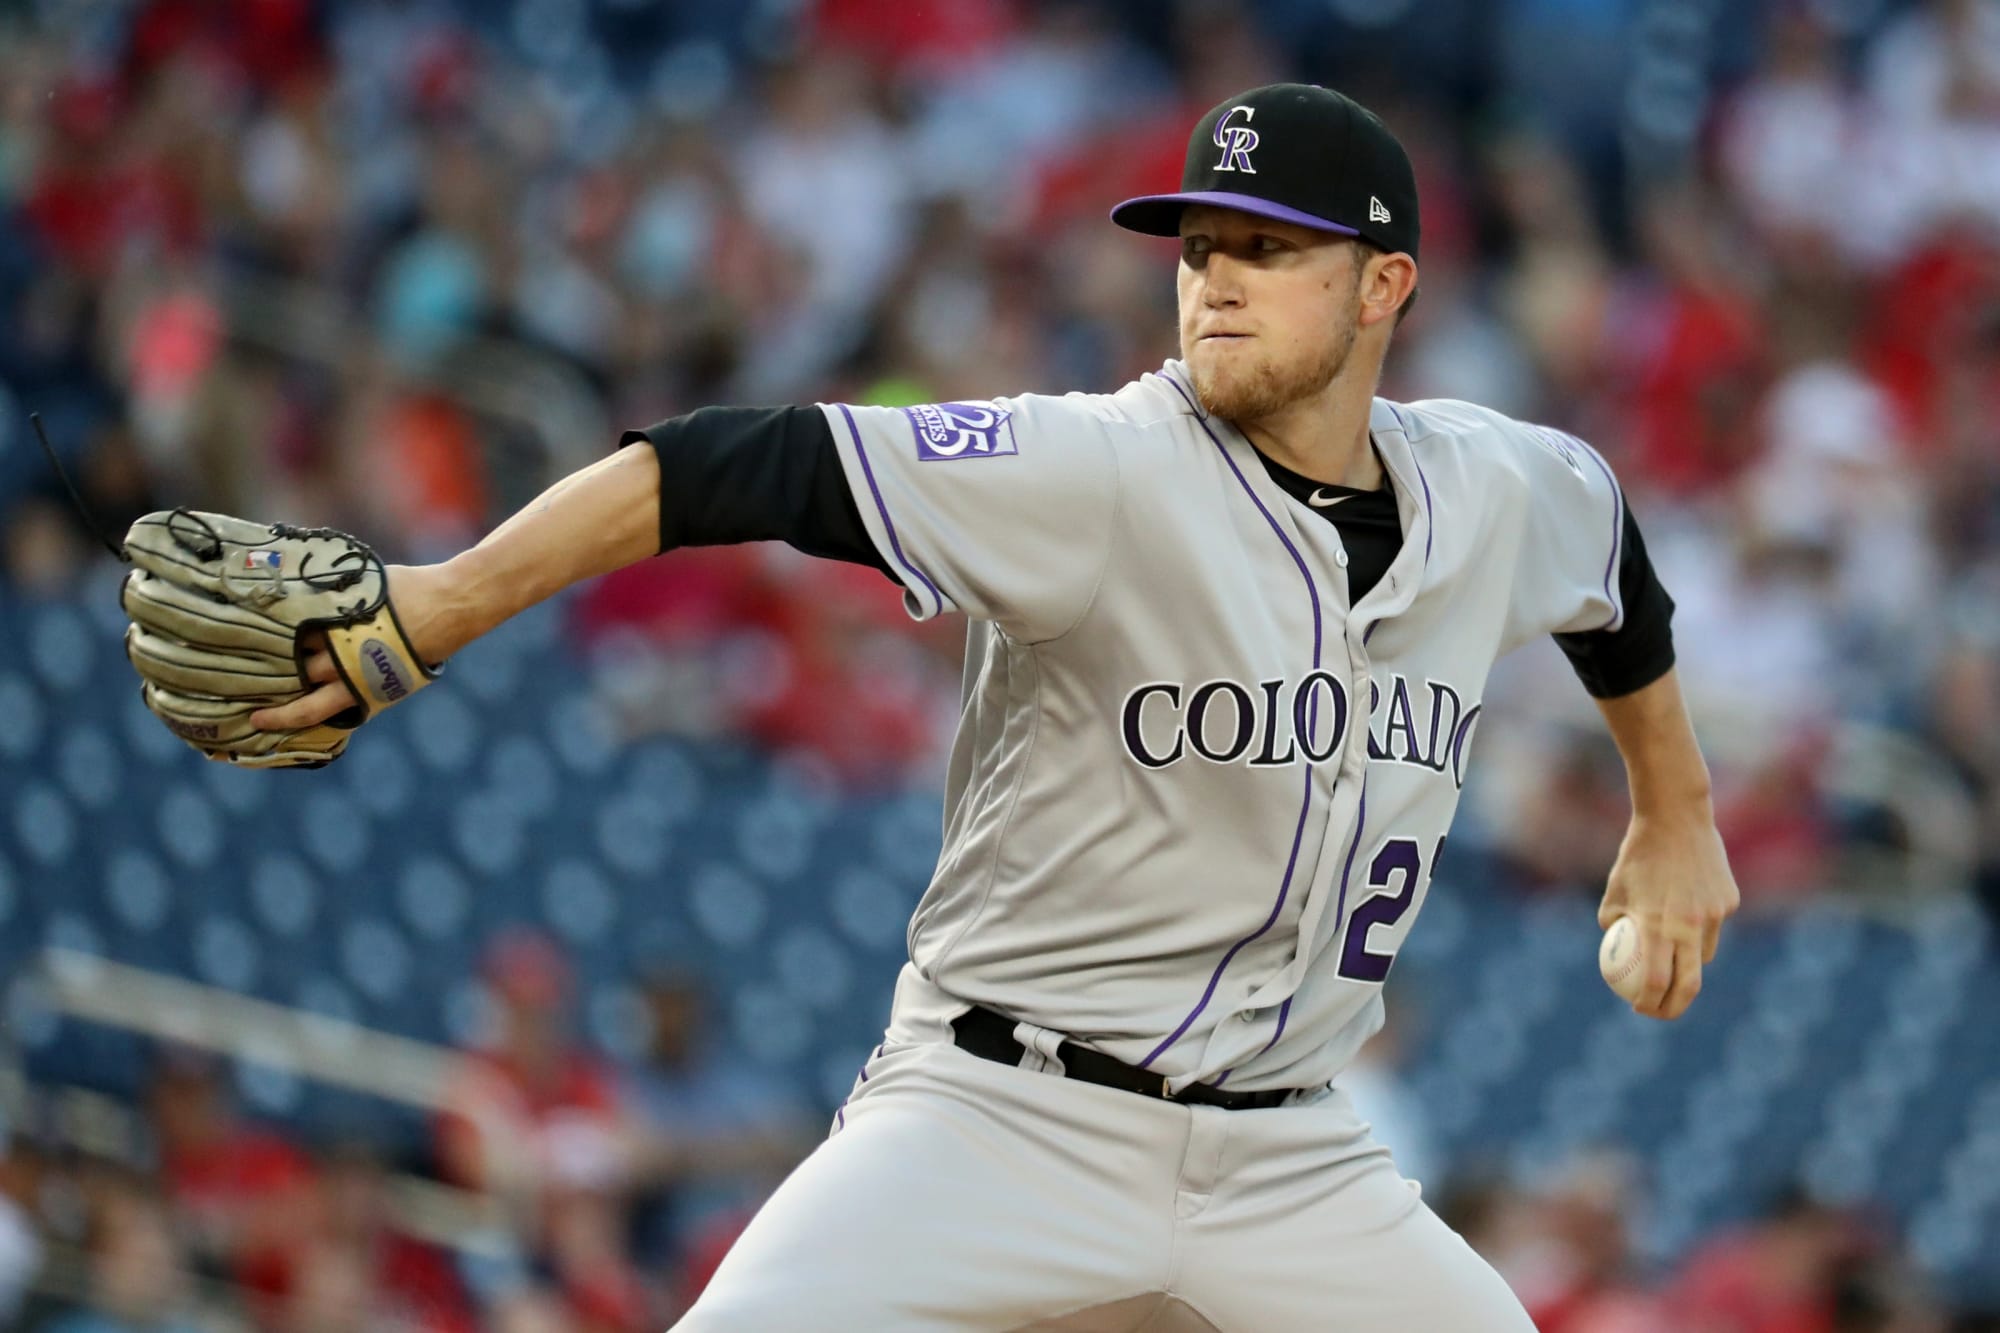 Colorado Rockies: How Kyle Freeland has changed on the mound